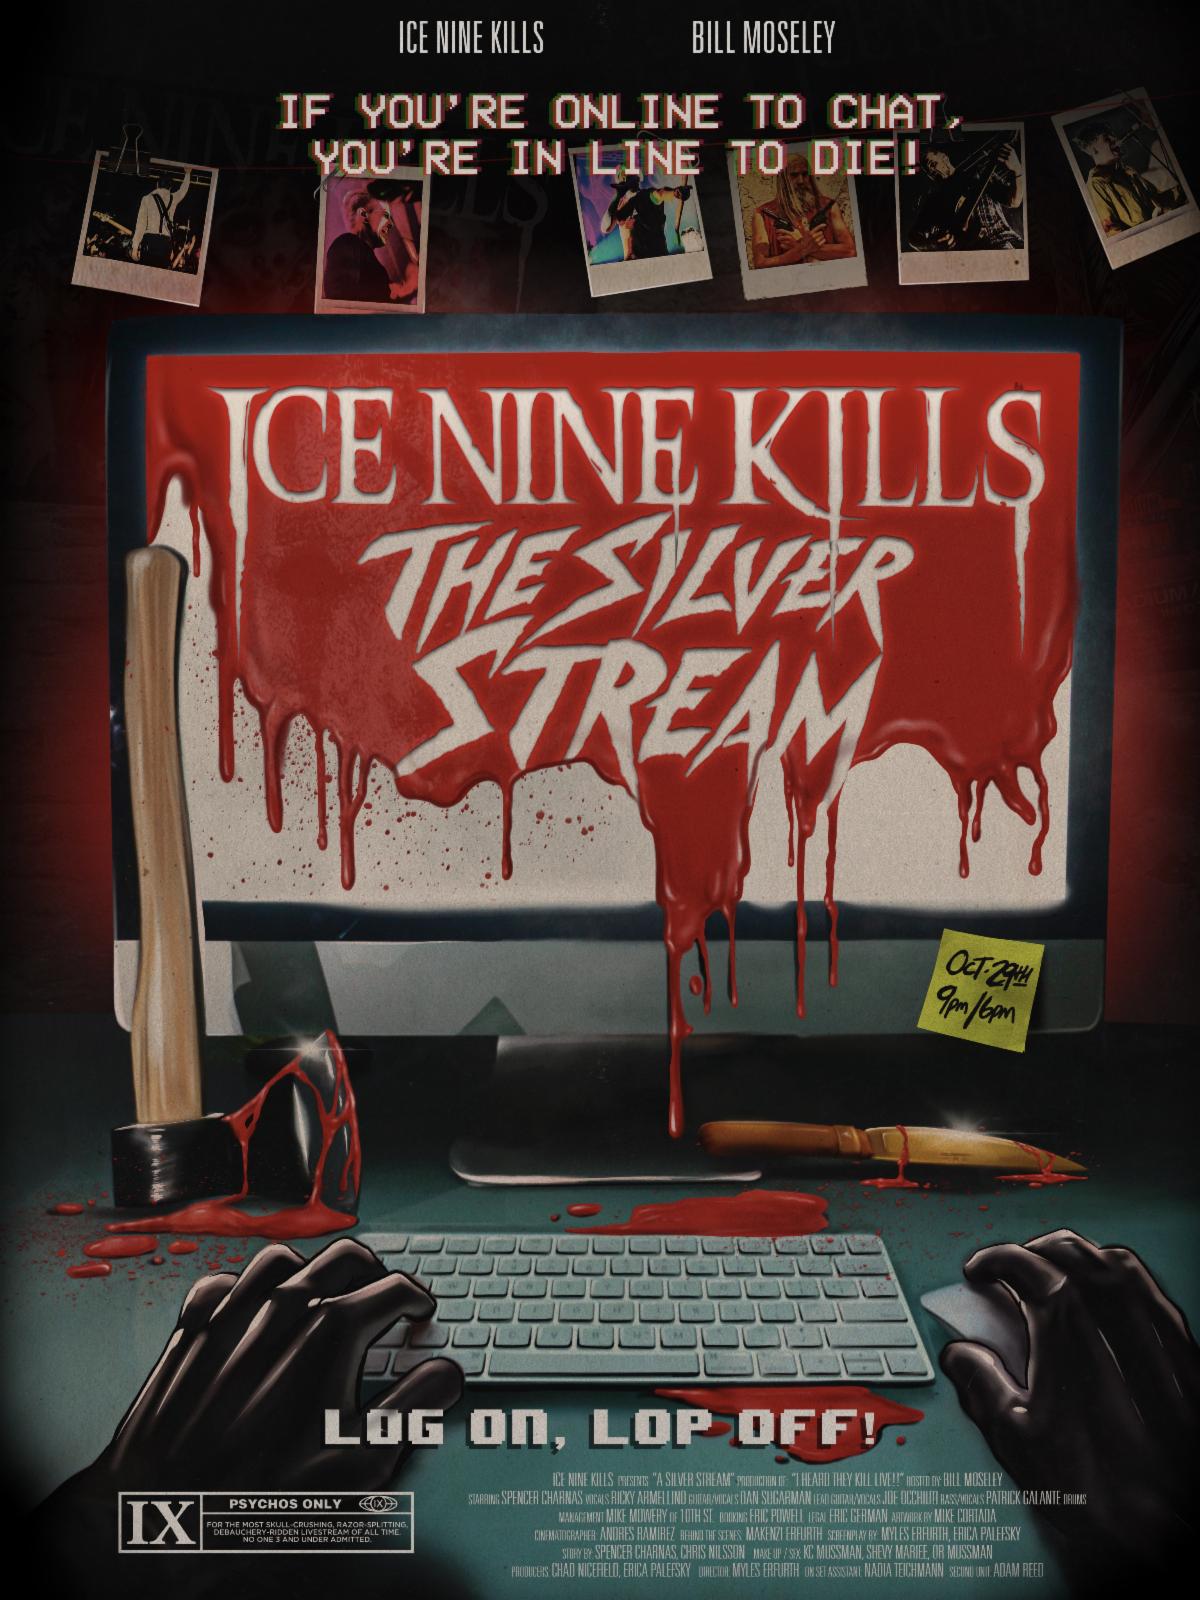 Ice Nine Kills Reveal Host, Trailer and Further Details For "The Silver Stream"